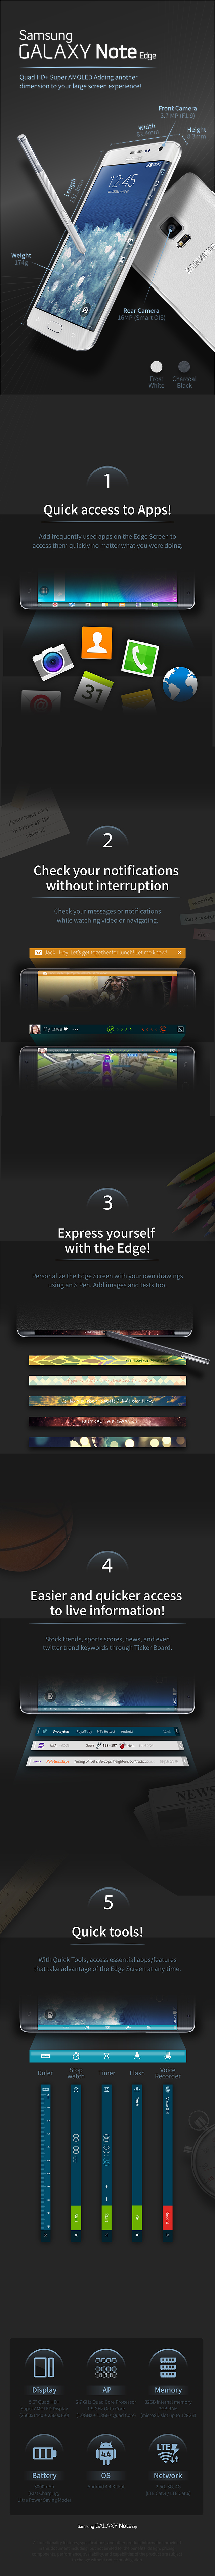 Galaxy Note Edge Features and Specifications Infographic